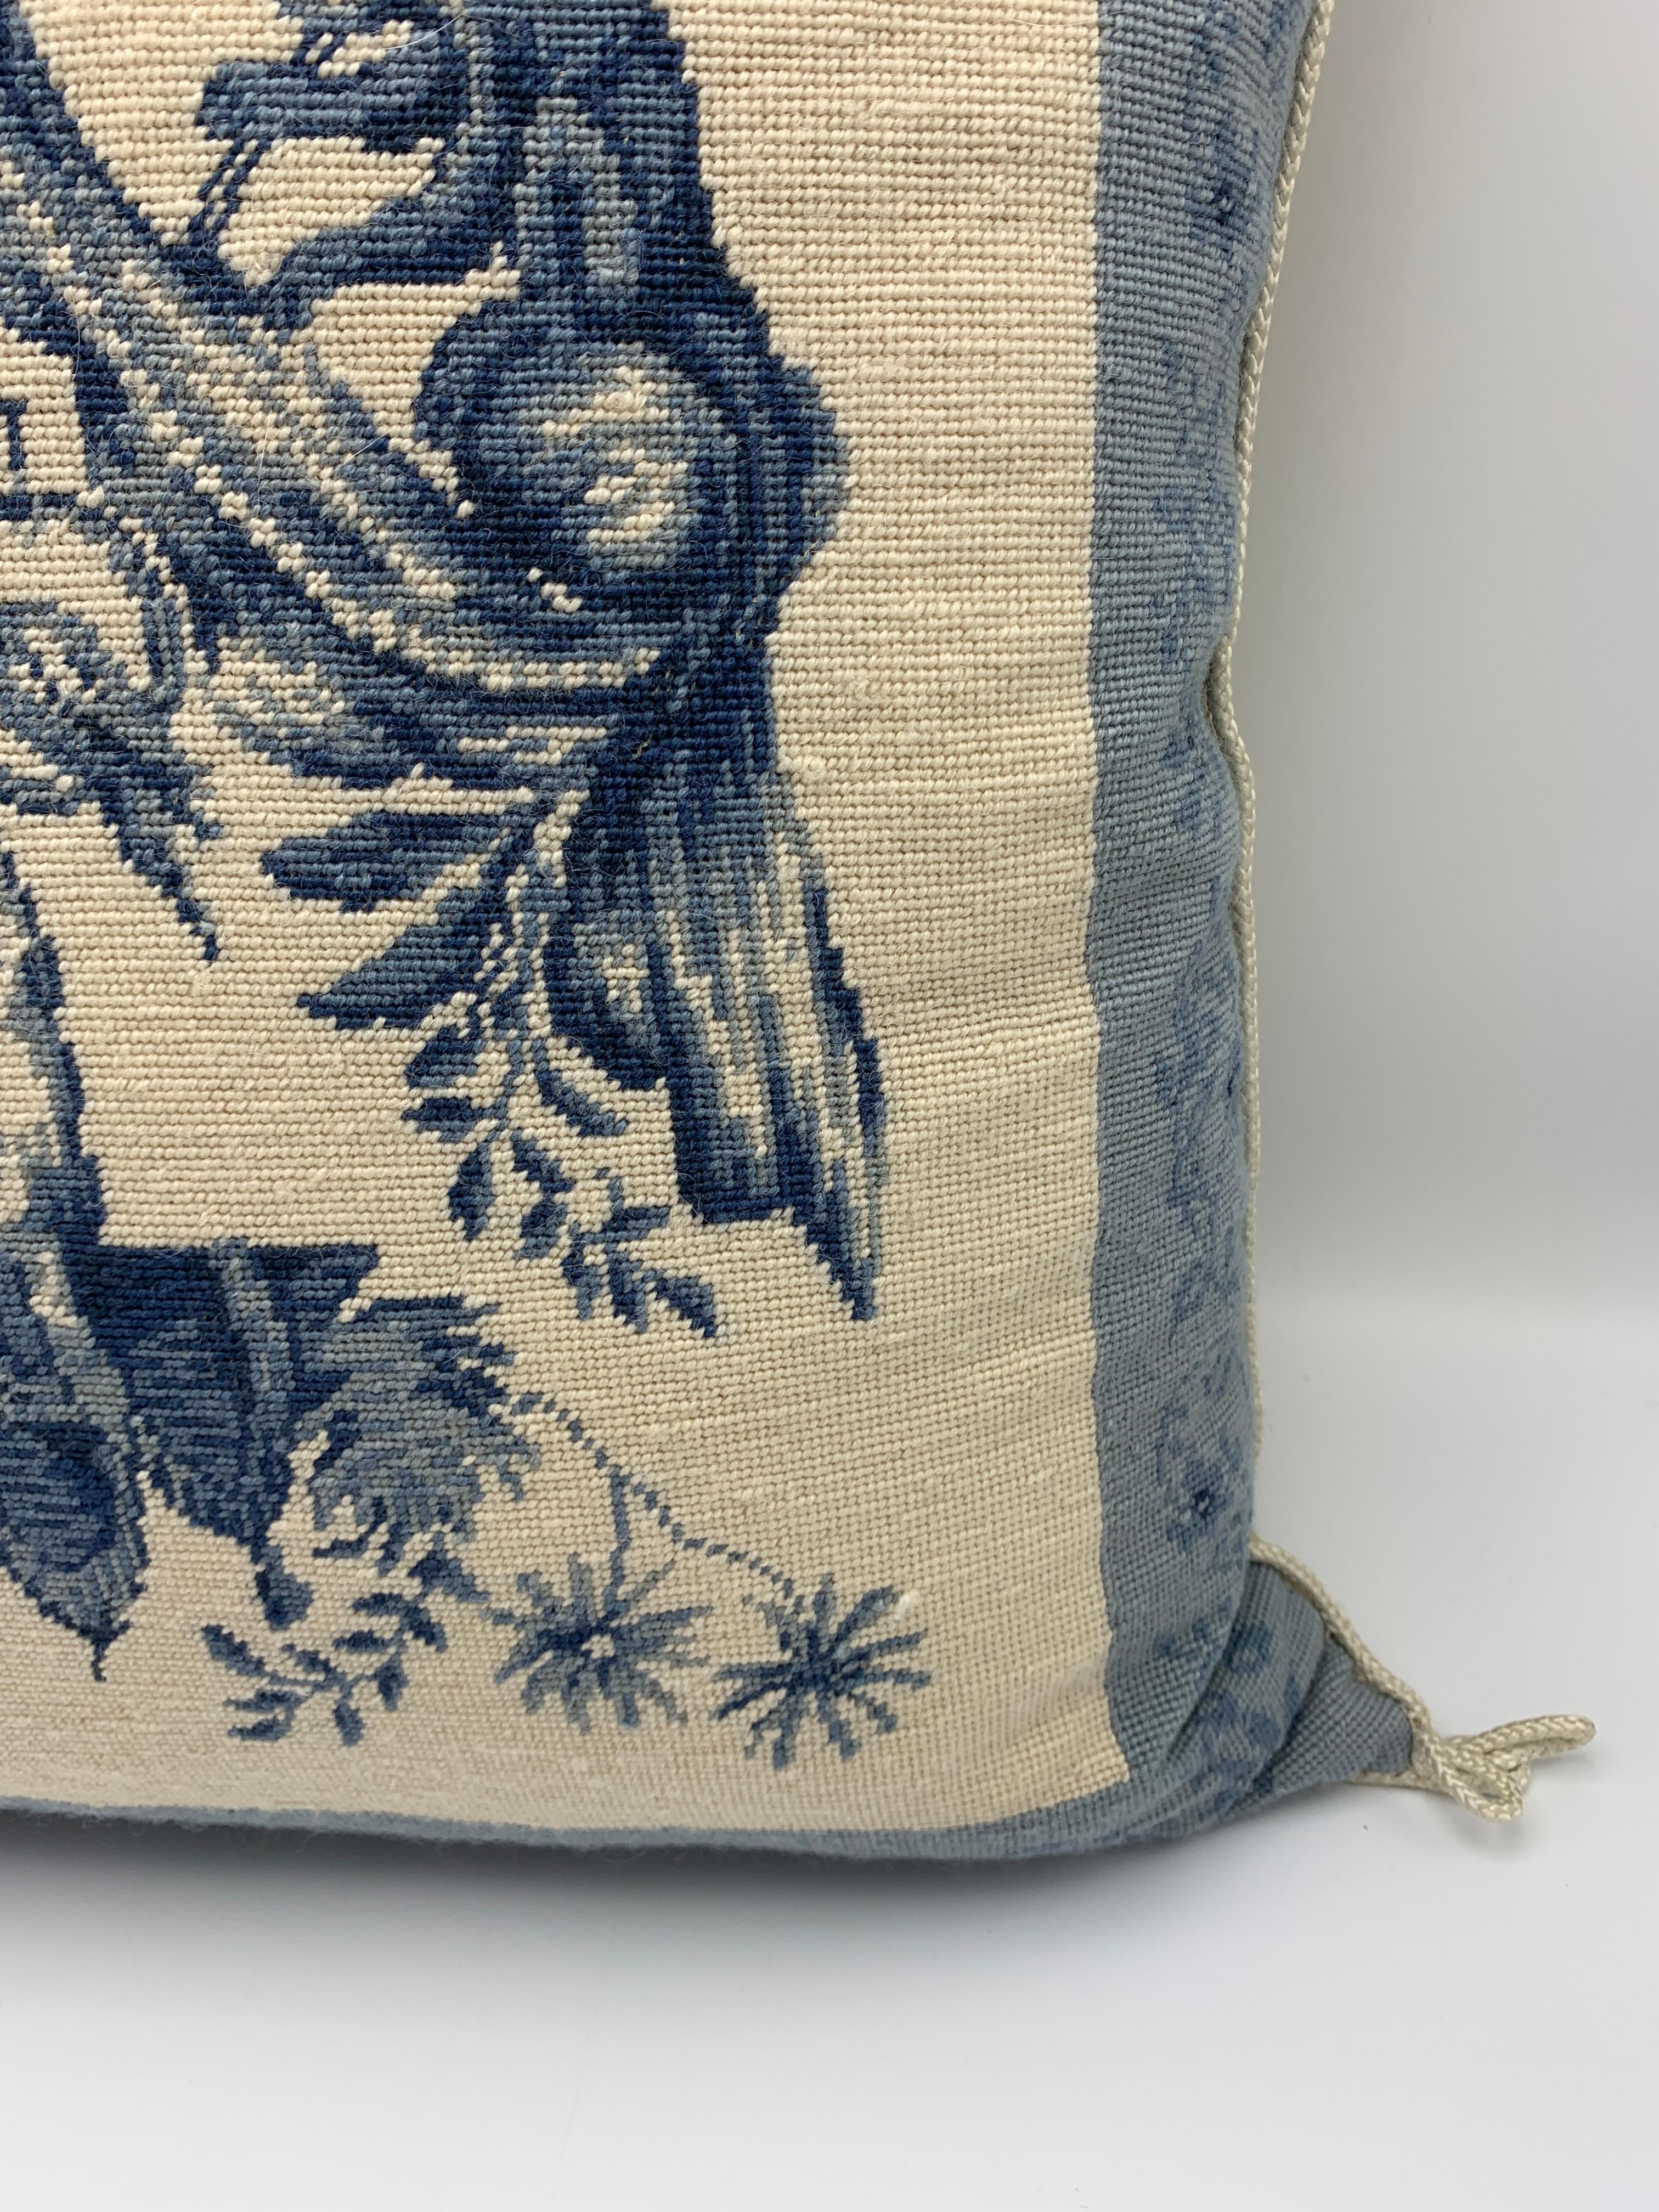 1970s Chinoiserie Blue and White Pagoda Needlepoint Pillow For Sale 4